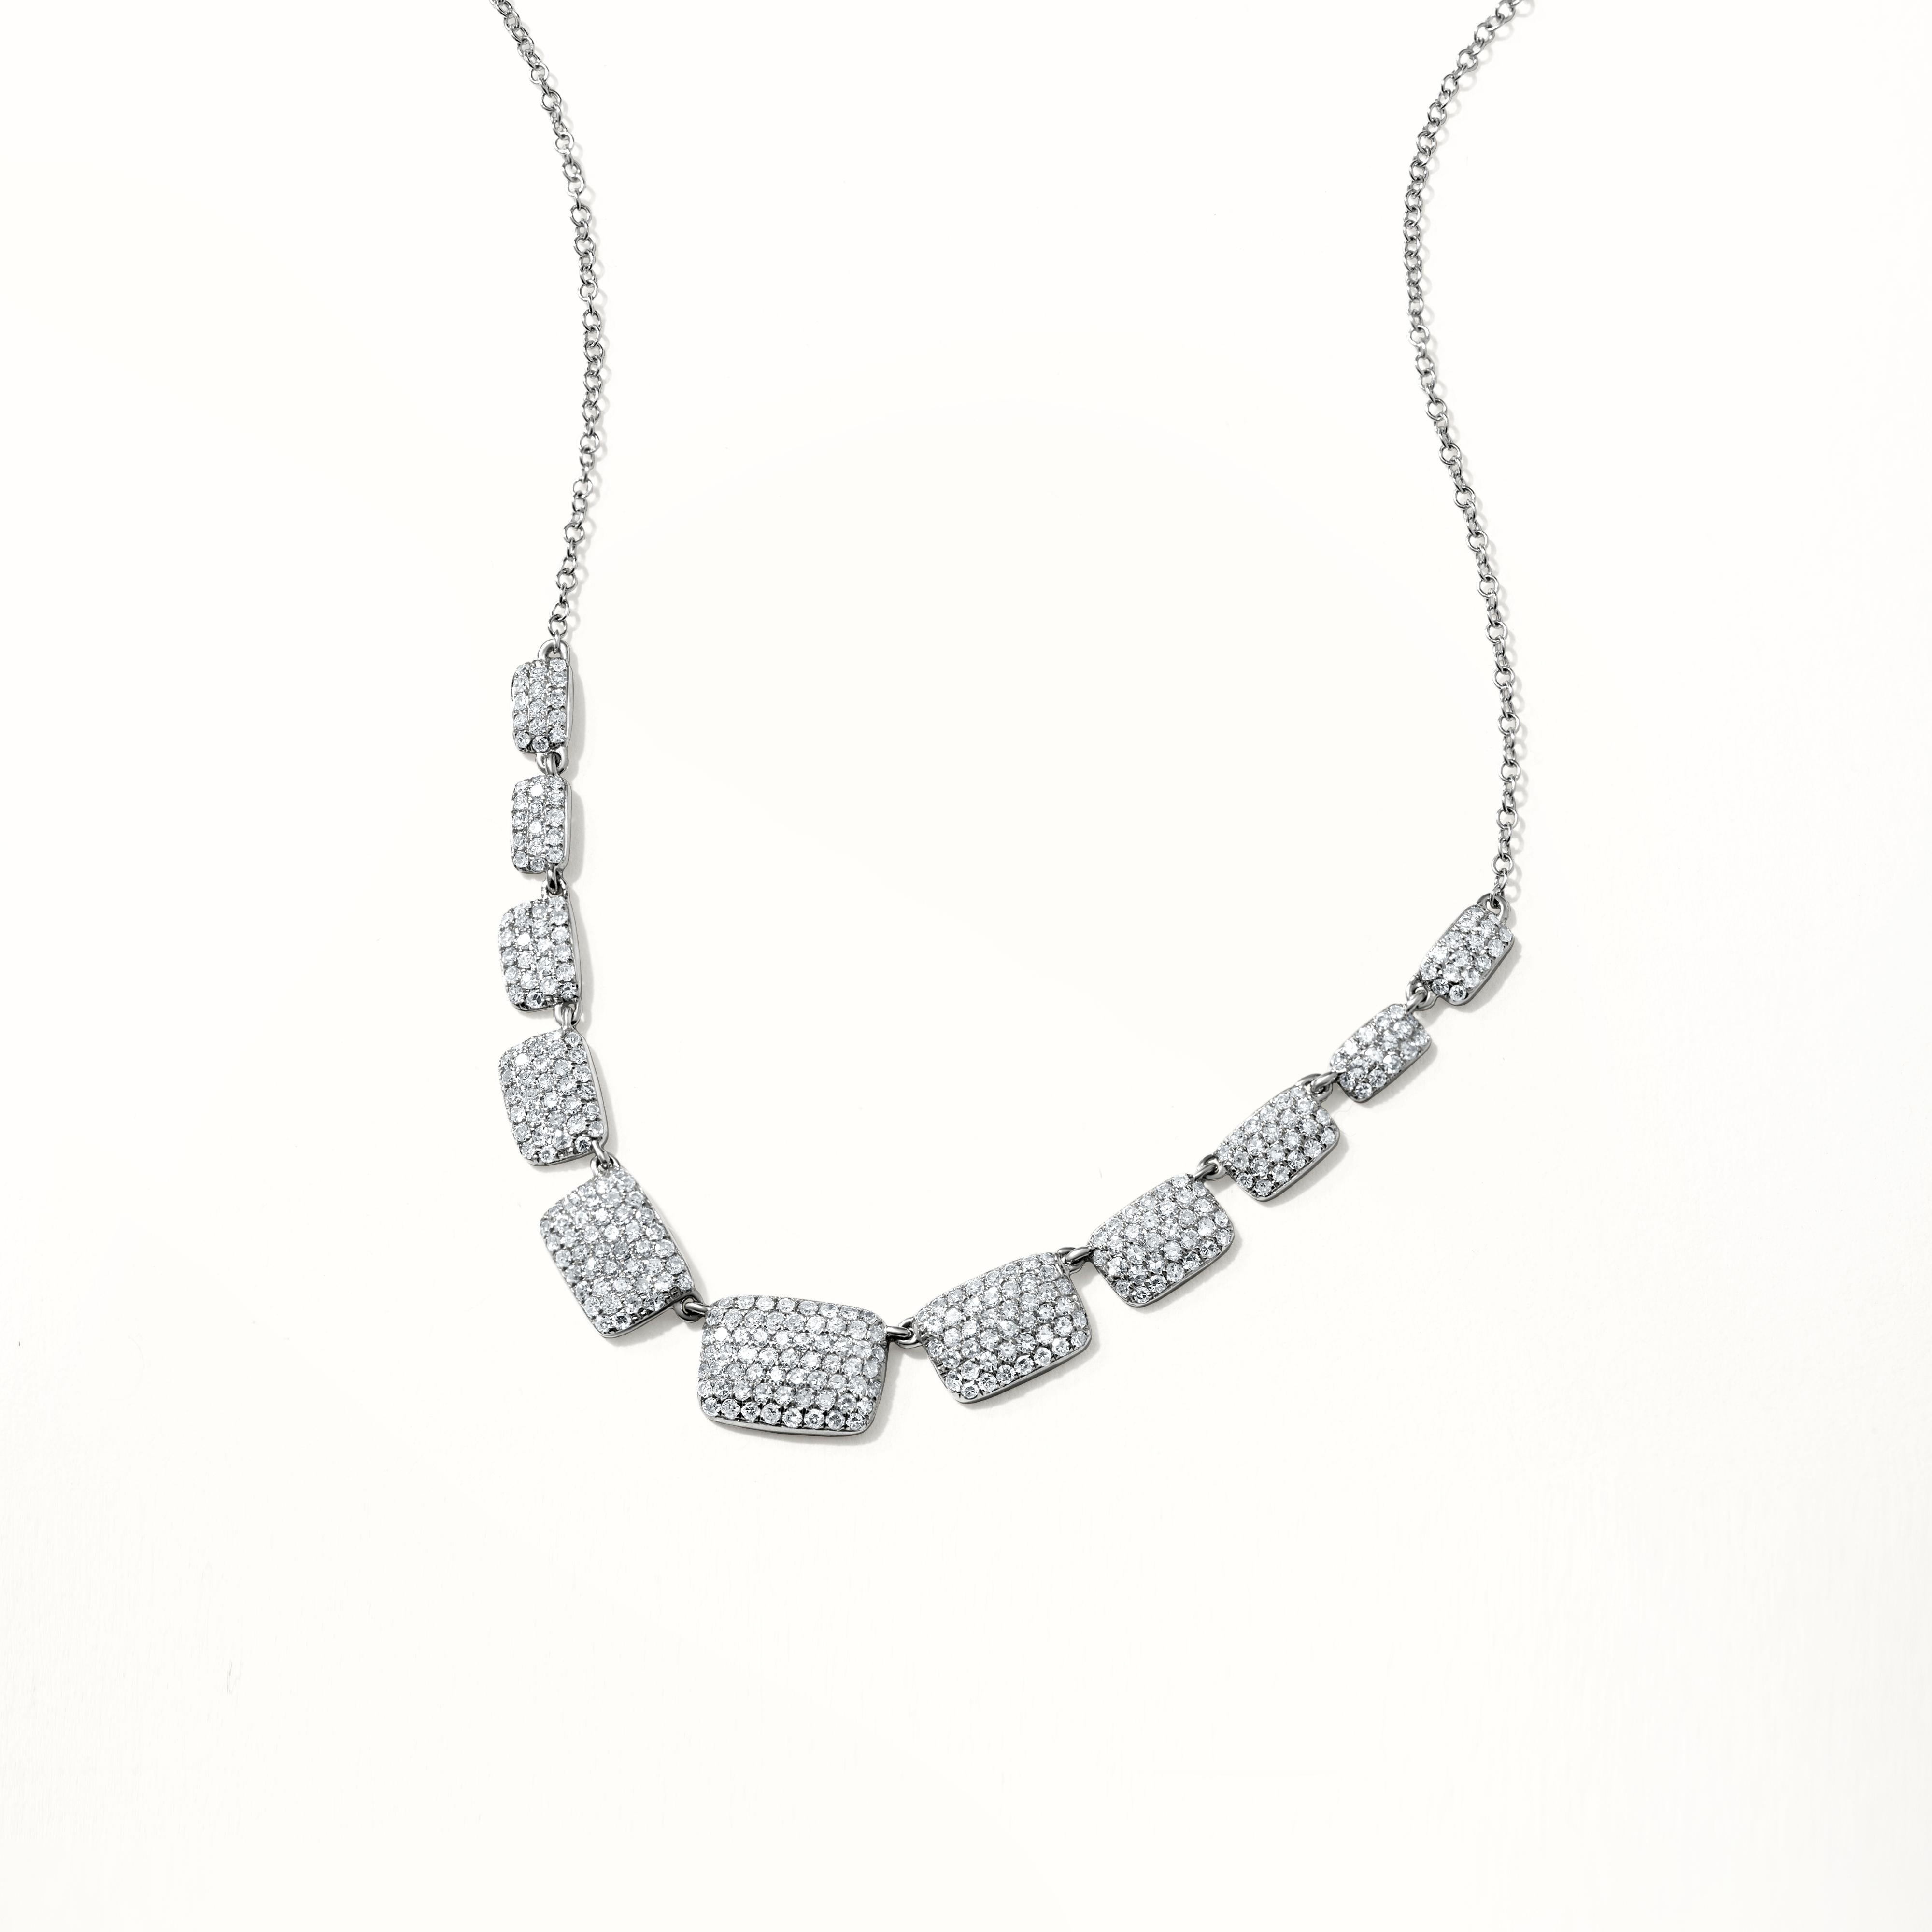 This magnificent item of  Luxle jewelry, which is made of 14K white gold, will embrace your neckline in luxury. The entire necklace showcases 326 round diamonds. Minimal, stylish, and looks modern, appears effortless perfect for your cocktail